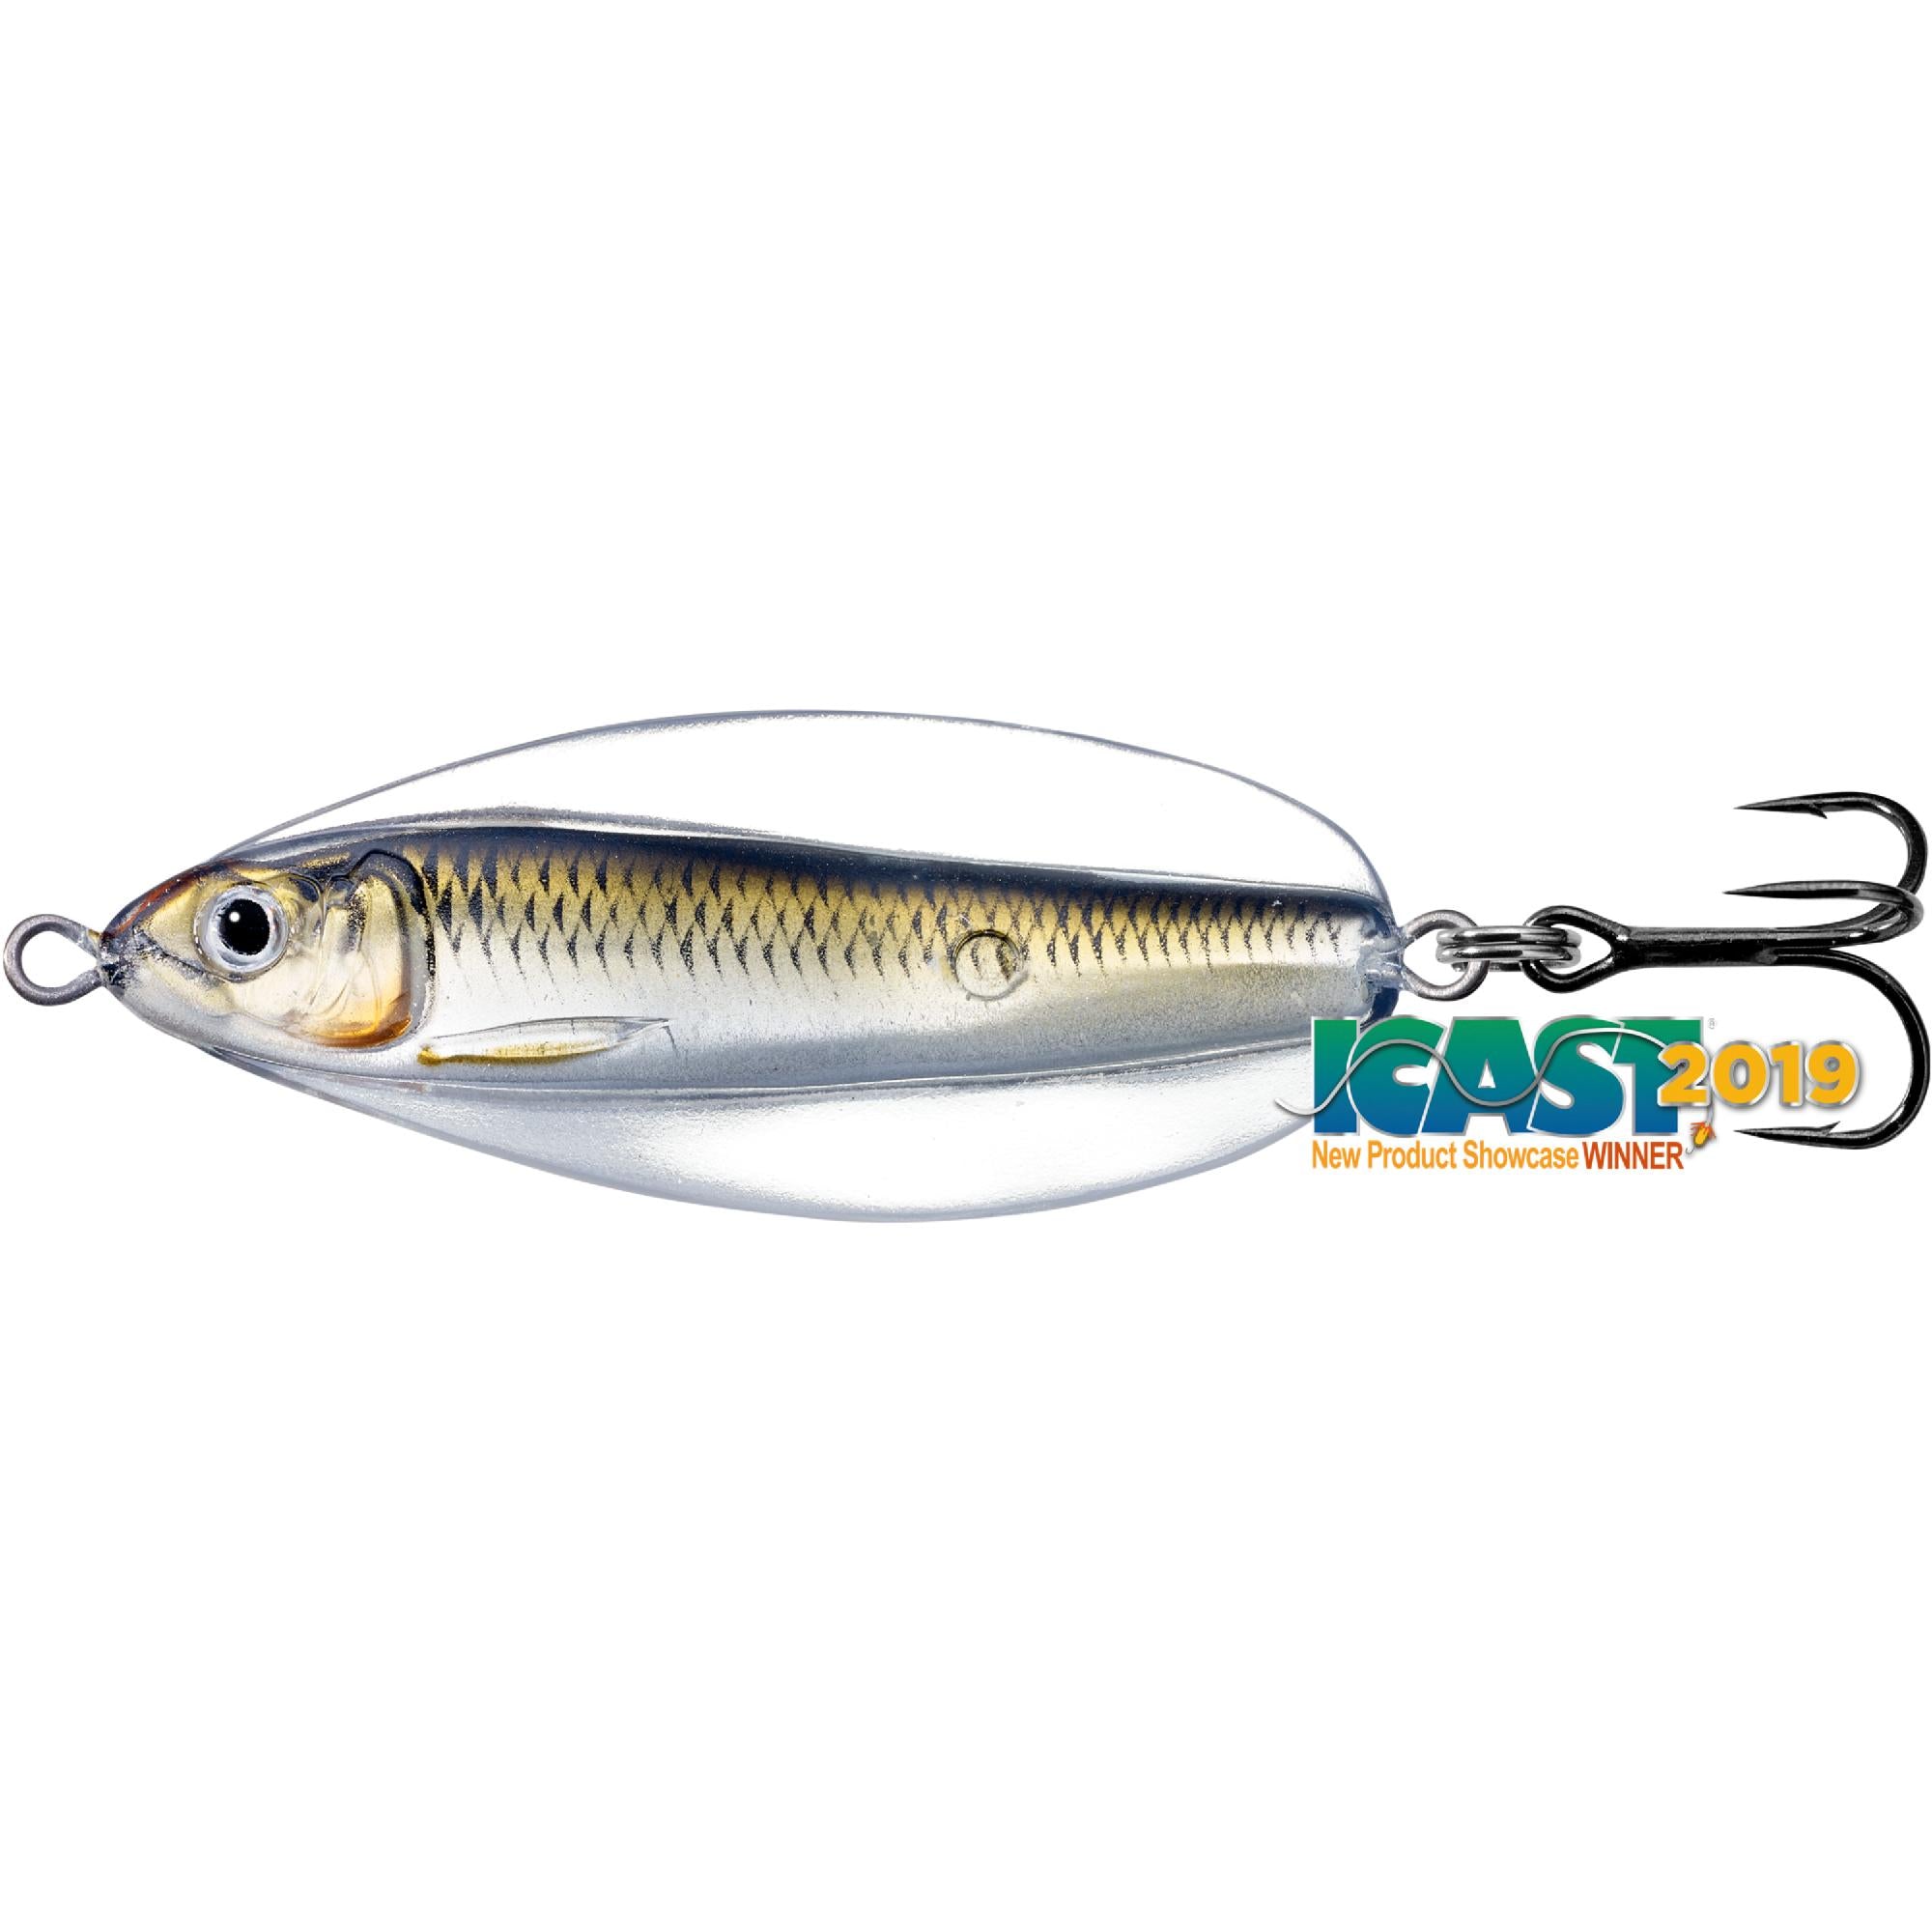  LIVE TARGET Magic Products Preserved Herring Fishing Equipment  : Sports & Outdoors